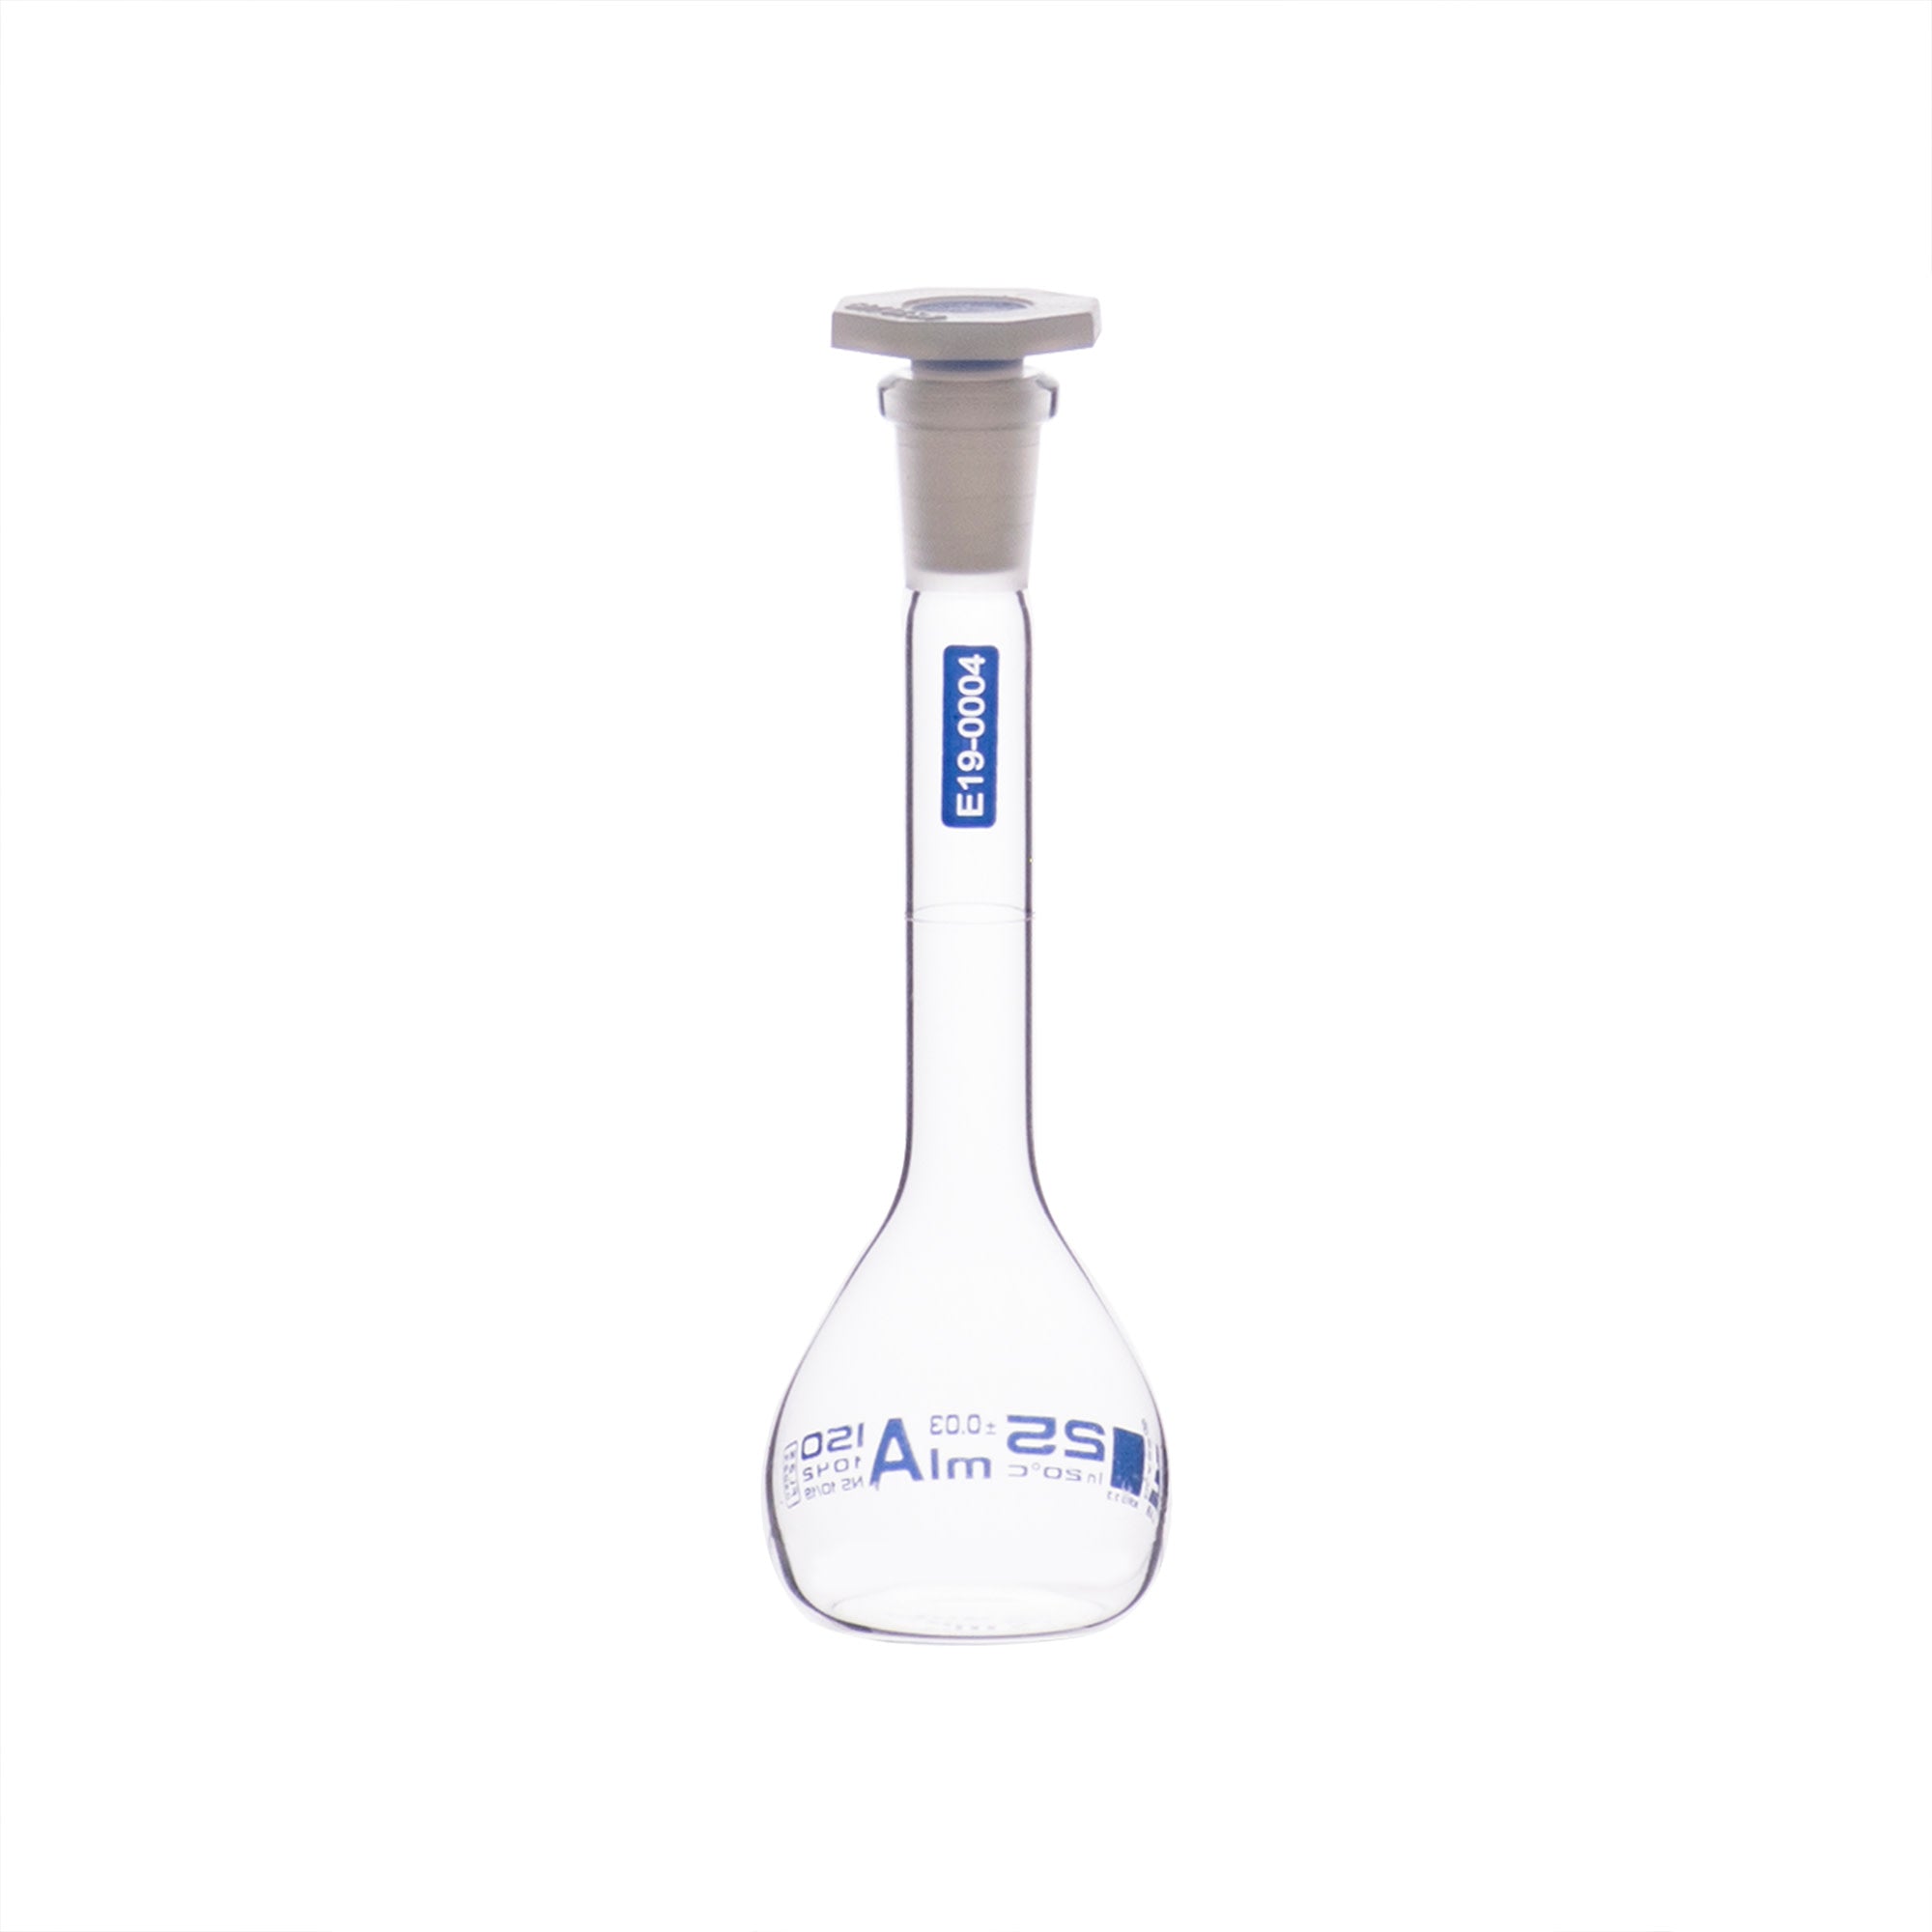 Borosilicate Glass Volumetric Flask with Solid Glass Stopper, 25 ml, USP Class A with Individual Work Certificate,  Pack of 2, Autoclavable